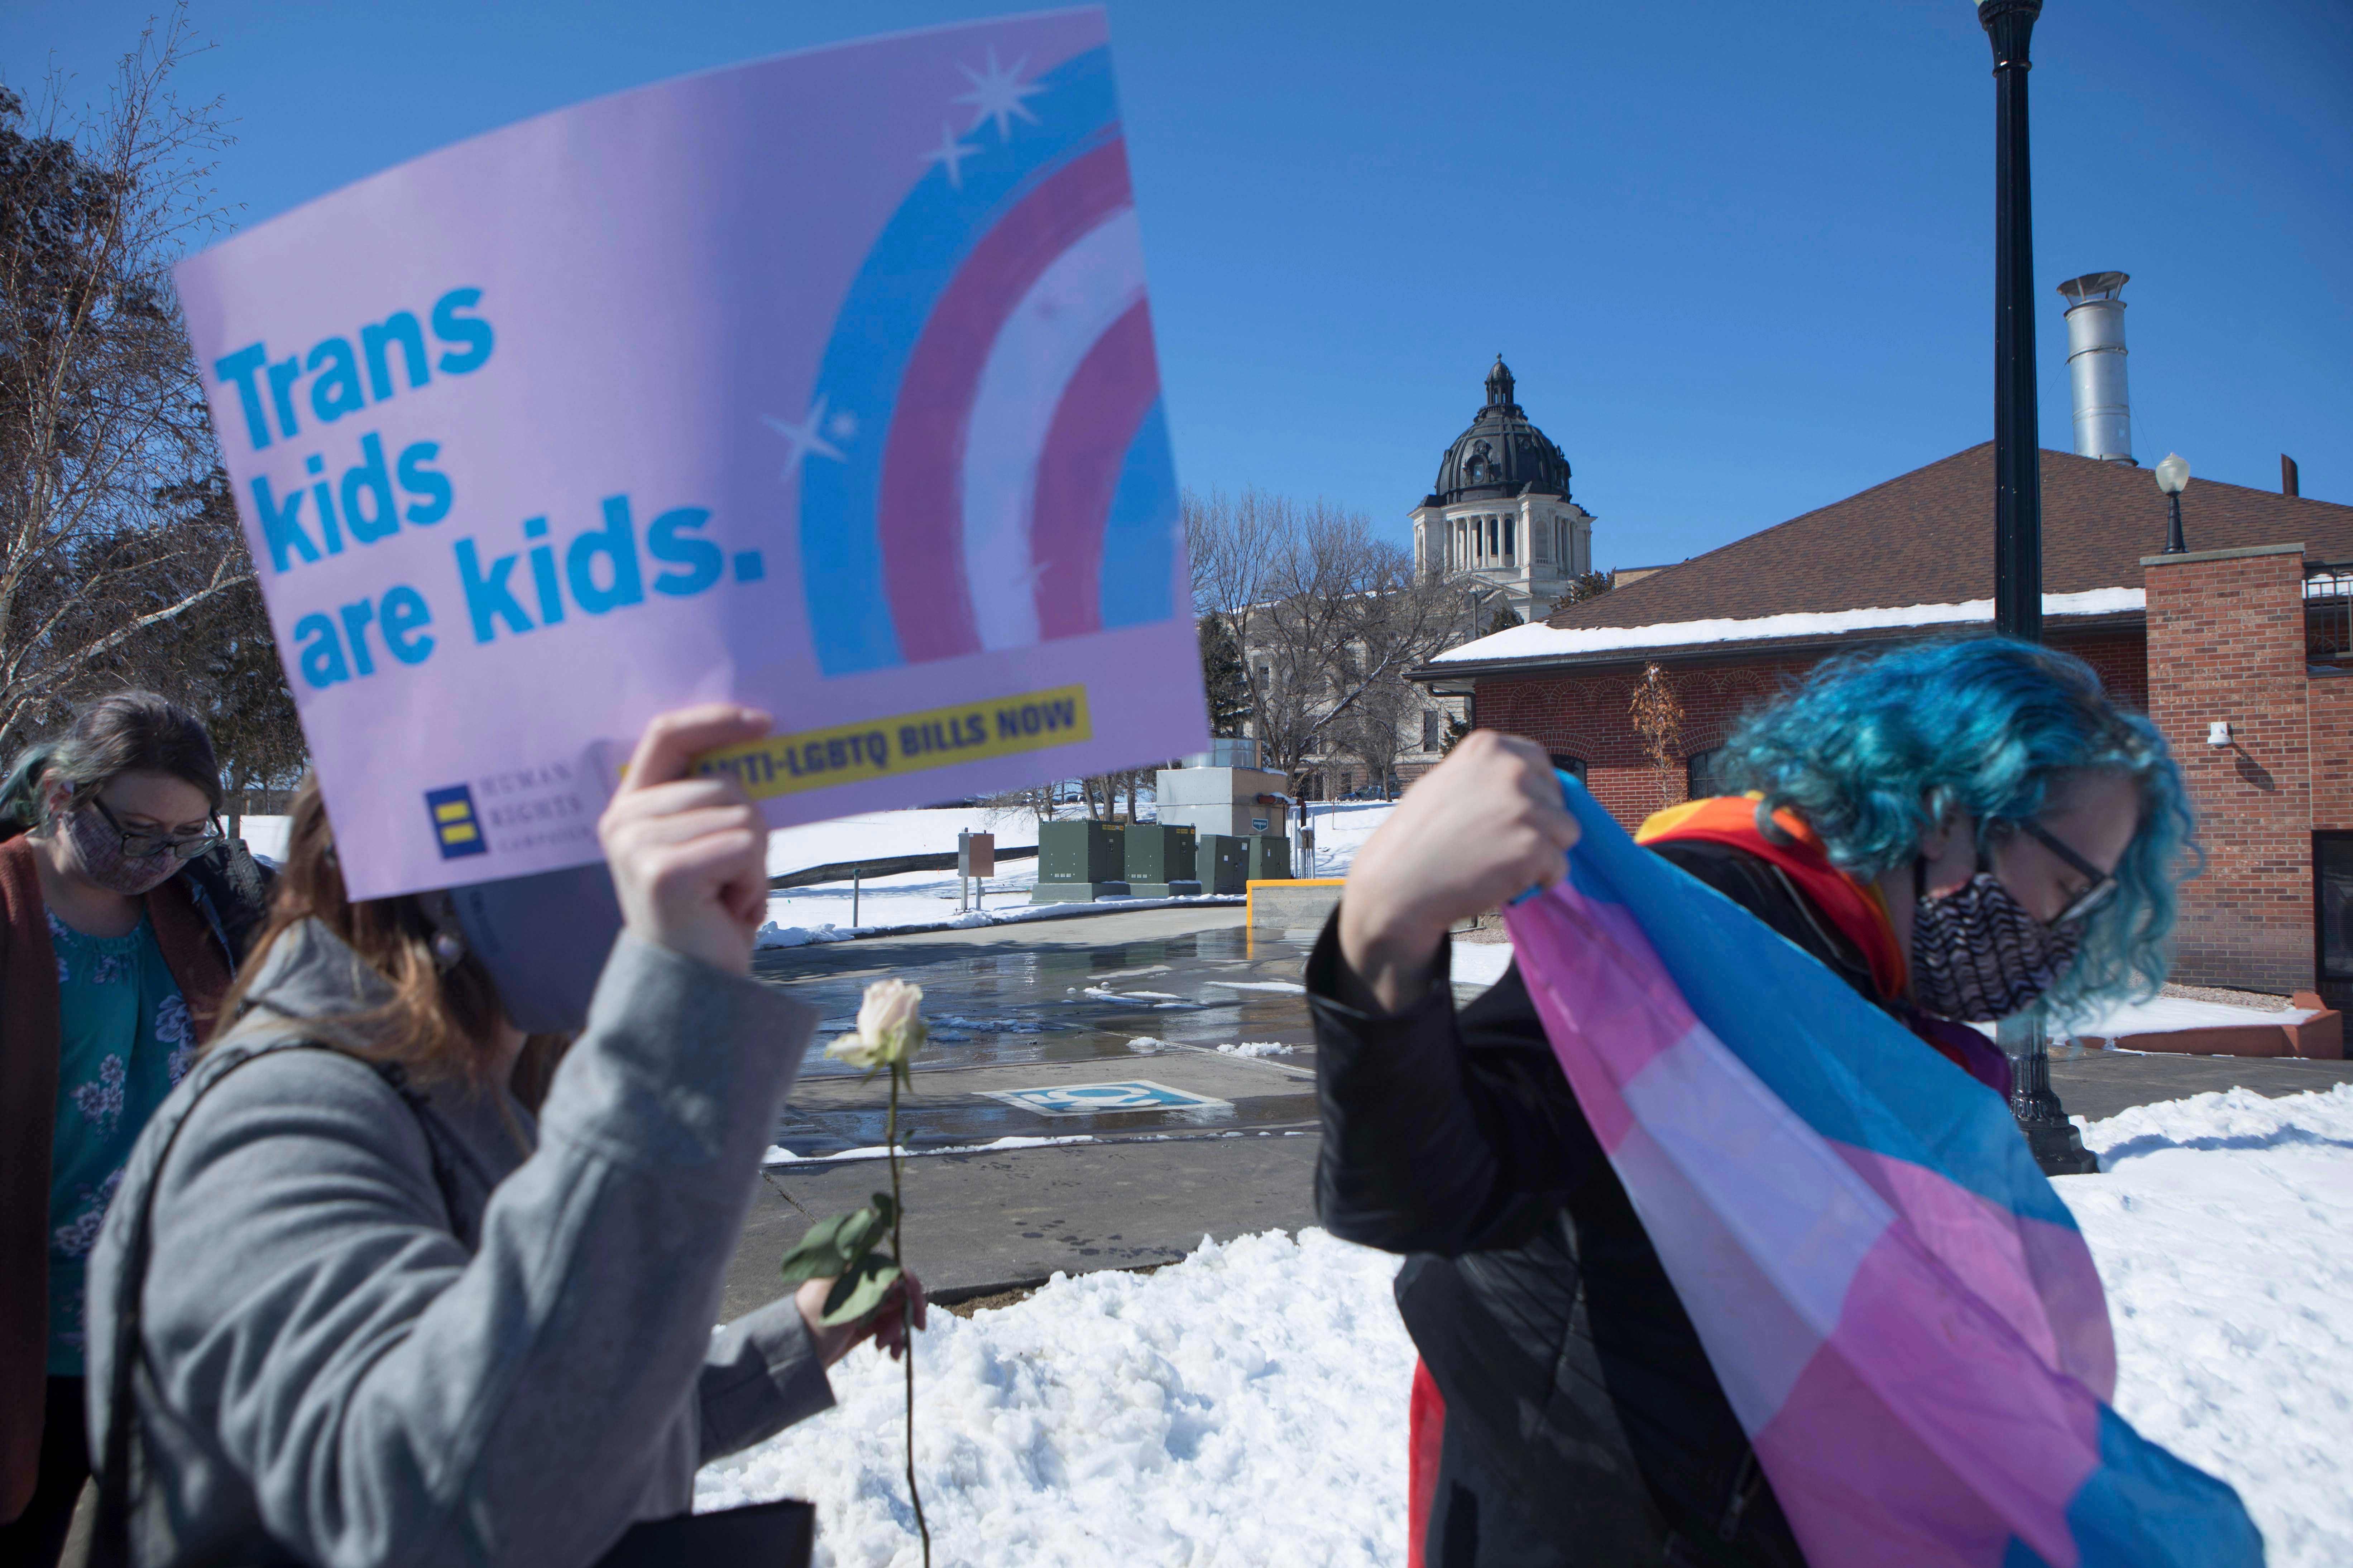 A protester holds a sign that reads "Trans kids are kids"